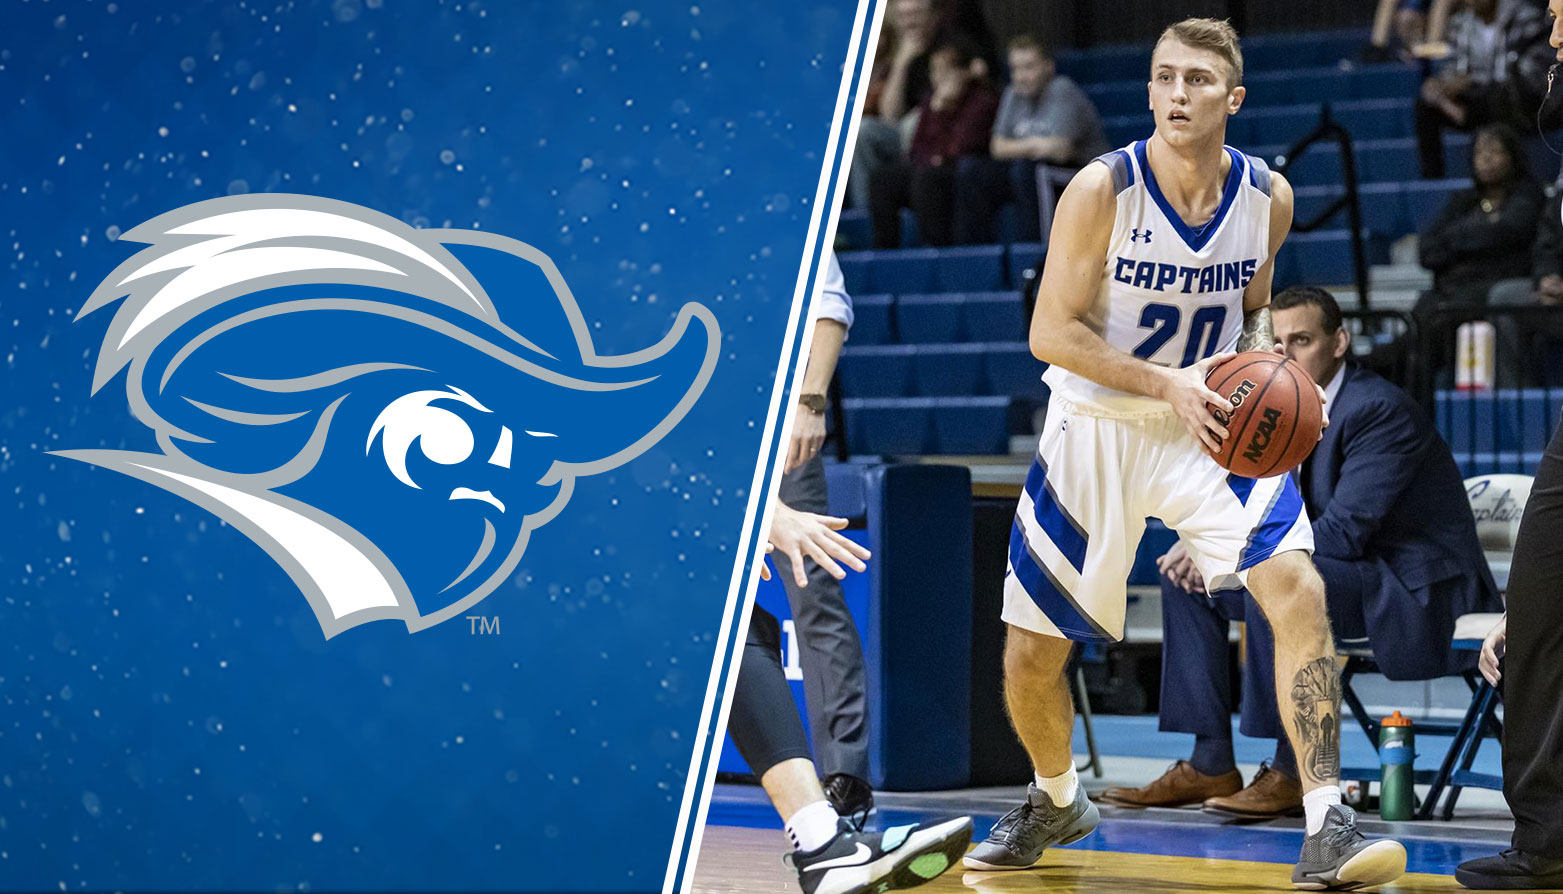 Christopher Newport's Jason Aigner Selected CAC Men's Basketball Player of the Week